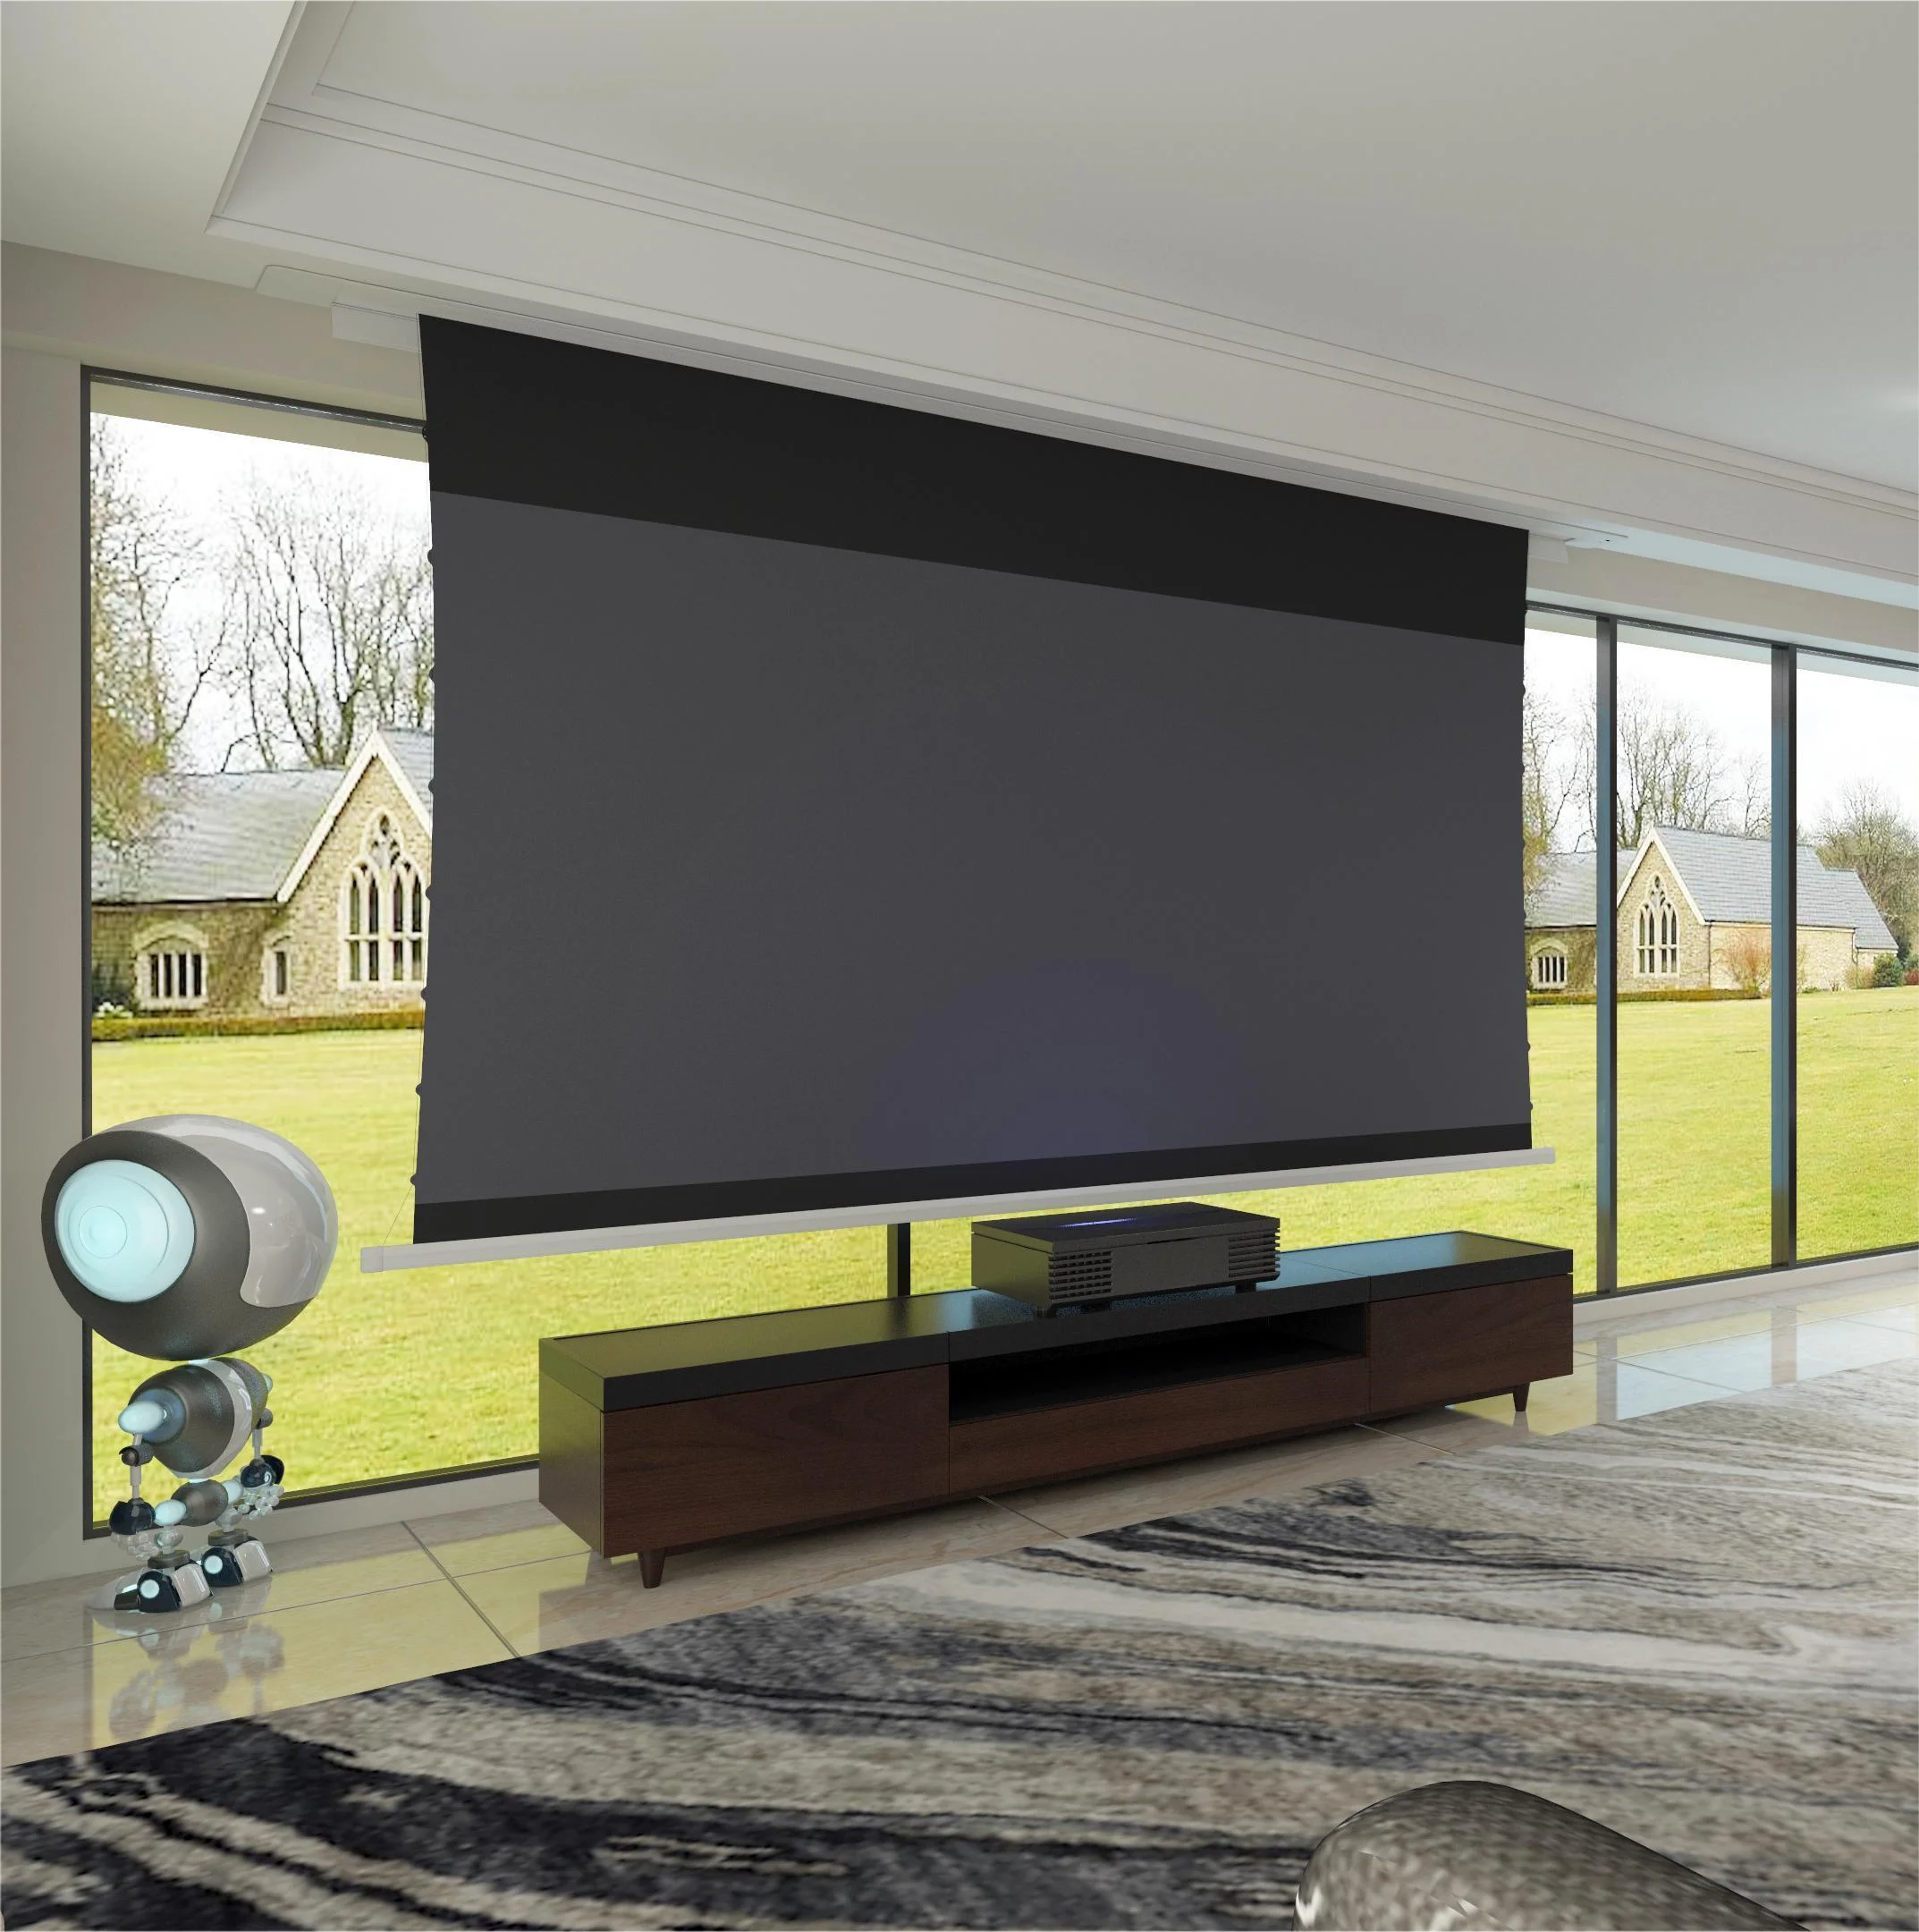 https://ae01.alicdn.com/kf/Sba9abf8725624aab89963a3d5f9a6b43I/150-In-Ceiling-Recessed-Projector-Screen-Motorized-Ceiling-Drop-Down-Projector-Screen-pantalla-proyector-electrica-para.png